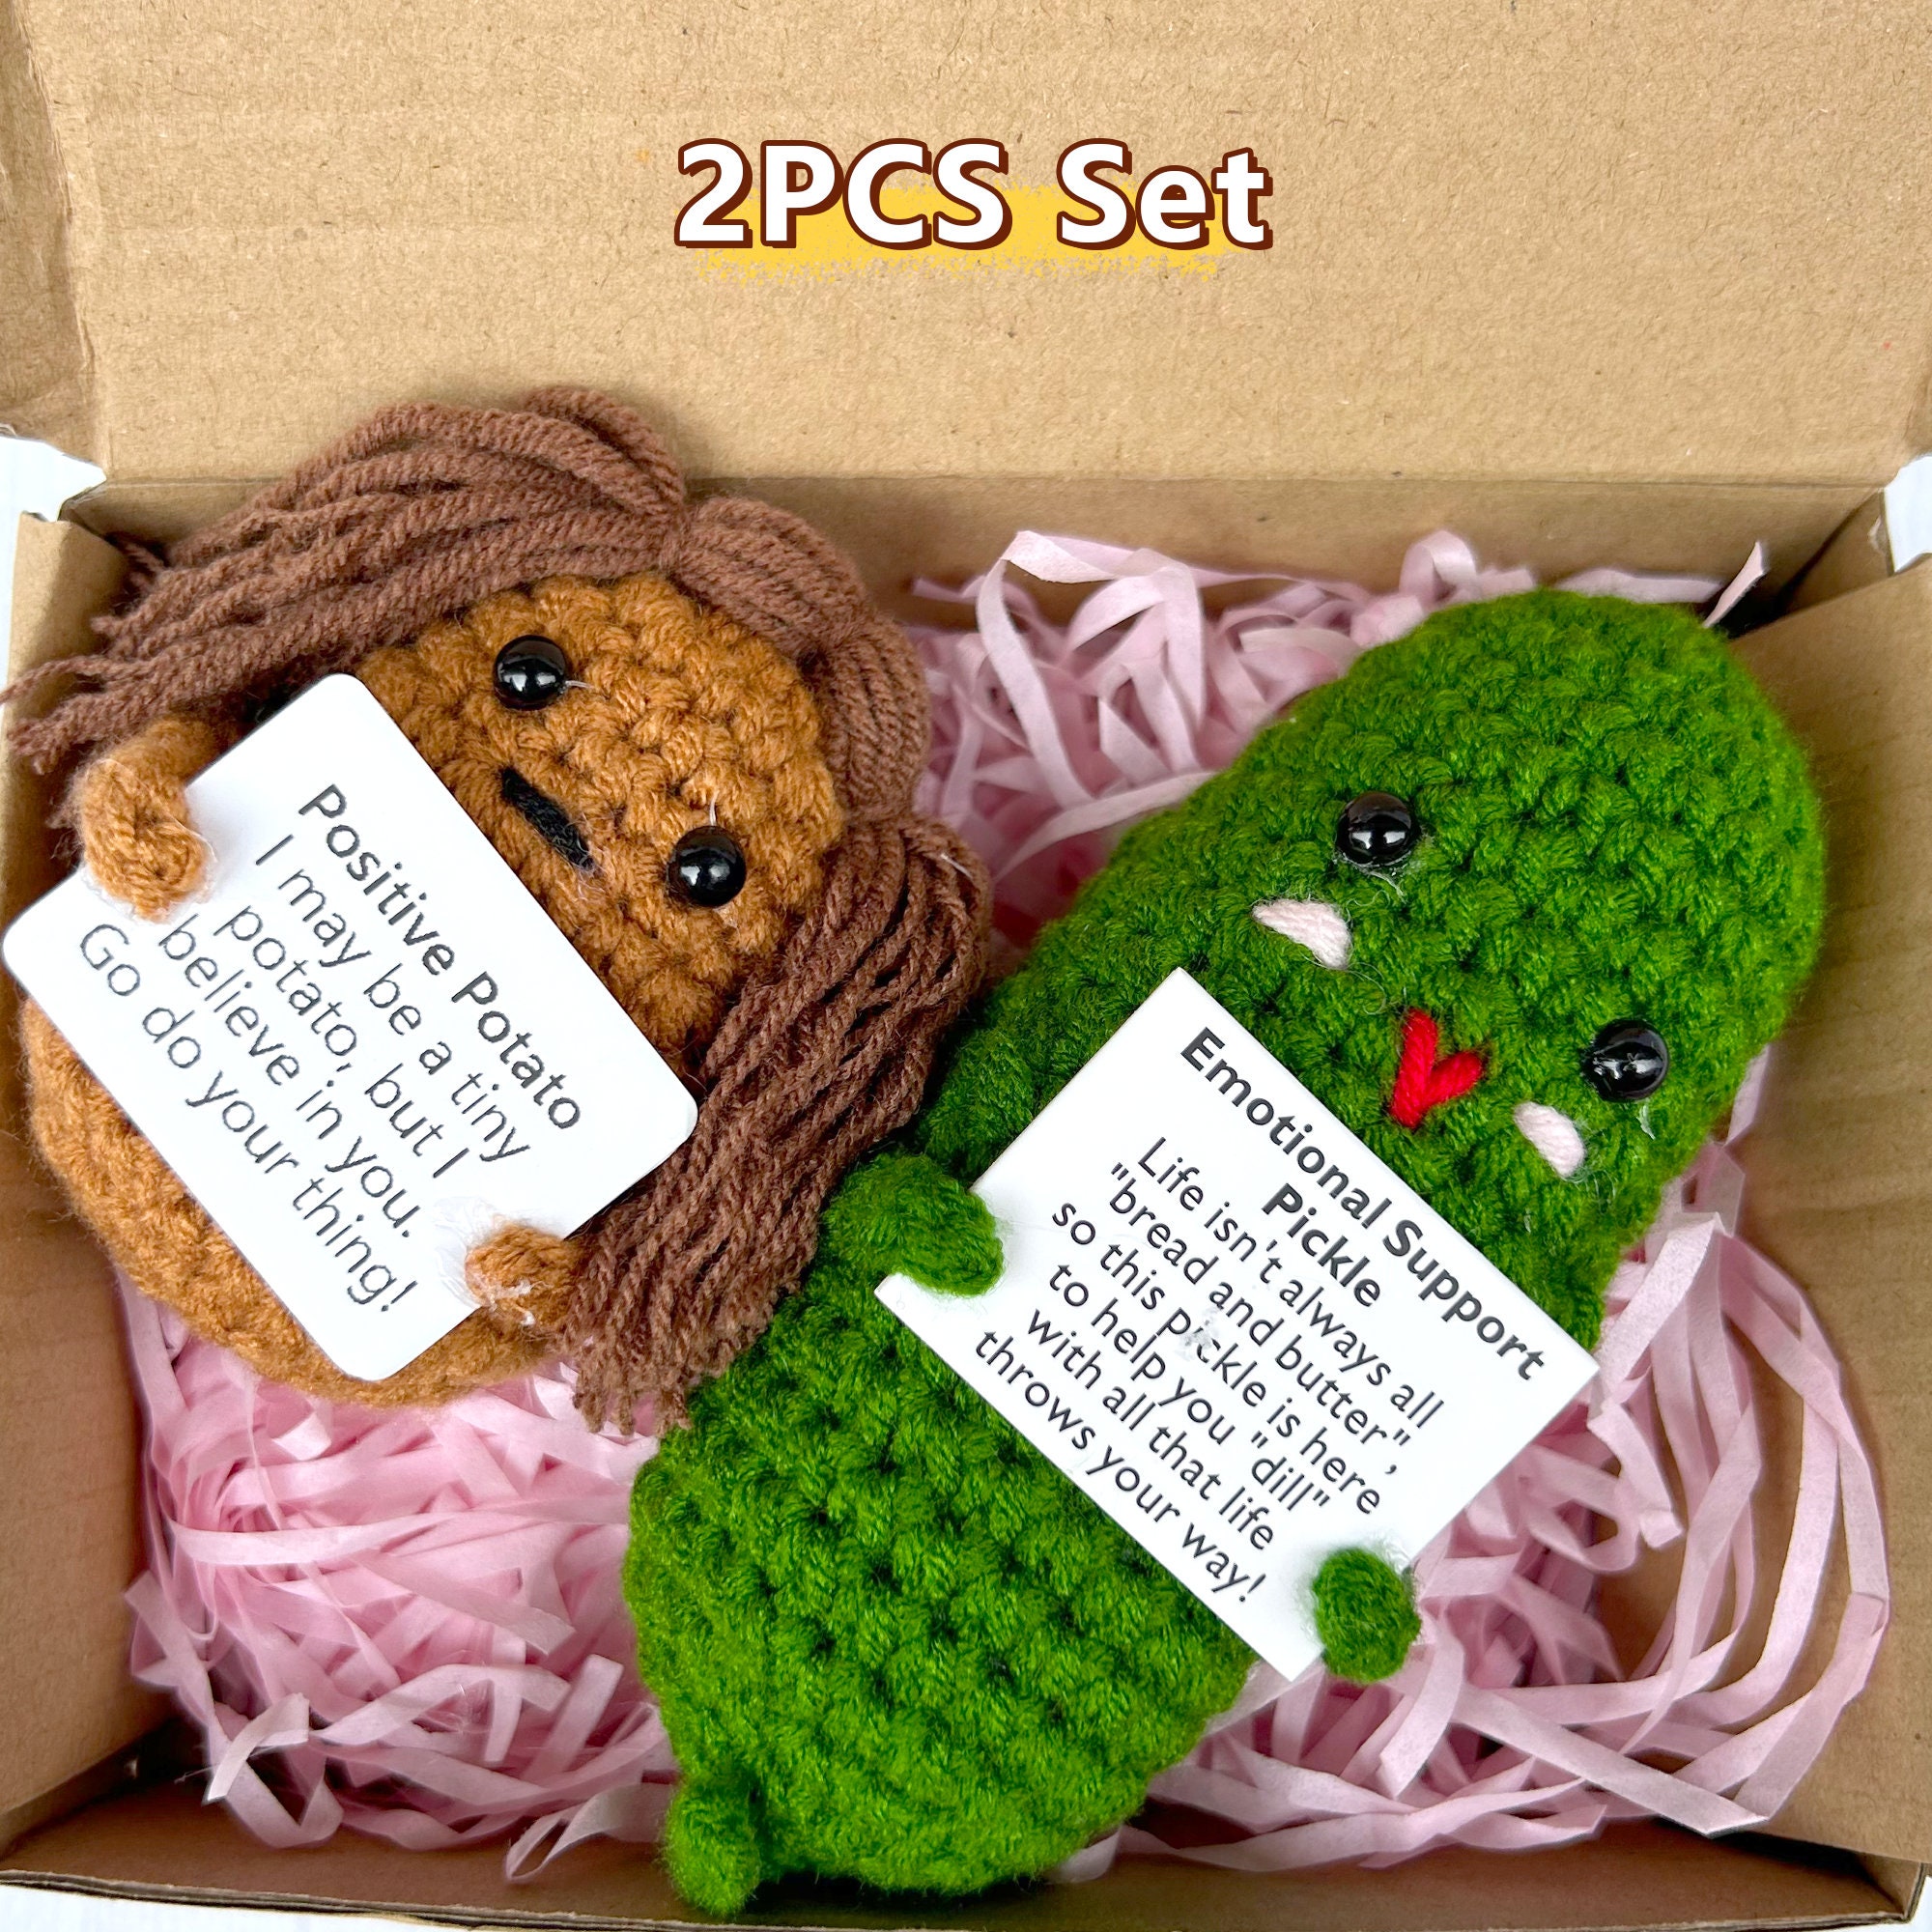  Positive Potato Crochet Dolls - Cute Room Decor Knitted Toys  Positive Cards Crochet Doll Emotional Support Plush Crochet Gift Home Decor  Funny Gifts for Women - Cute Potato Office Decoration Cute